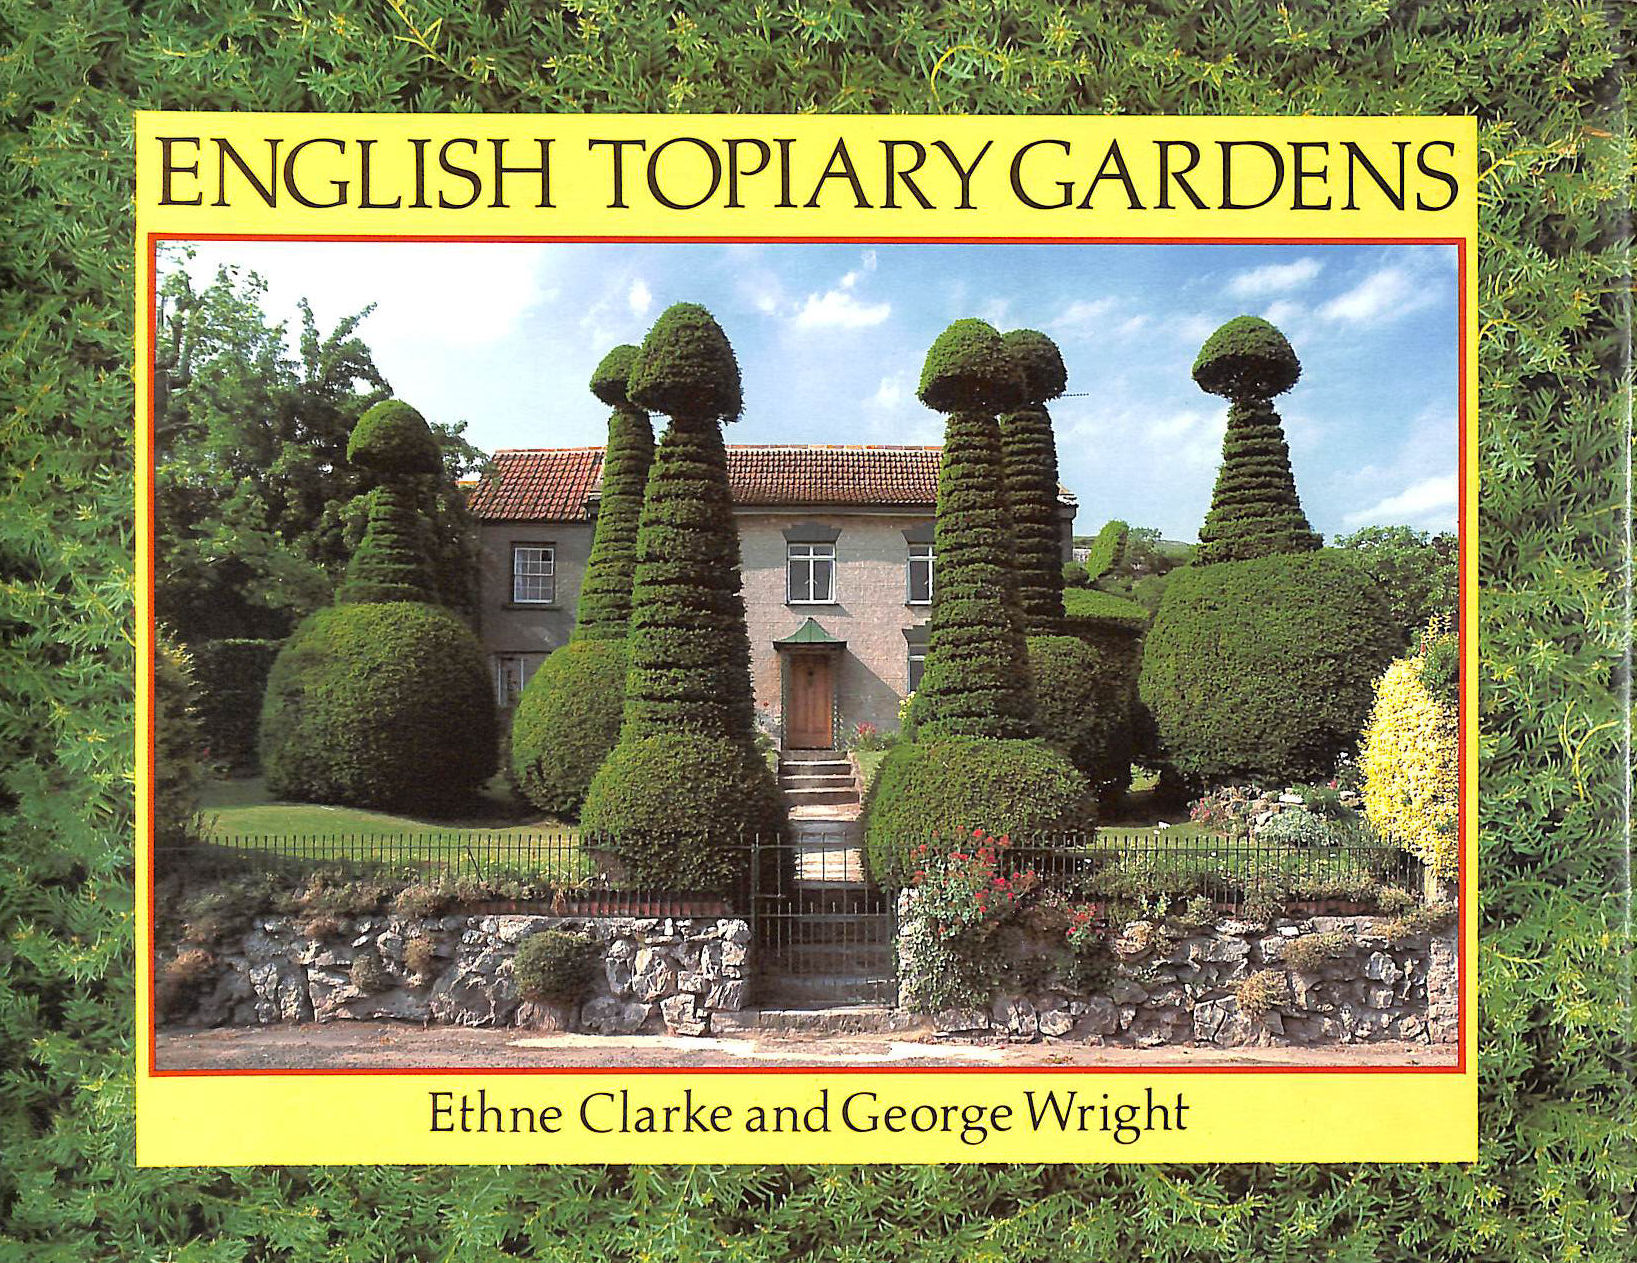 CLARKE, ETHNE; WRIGHT, GEORGE - English Topiary Gardens (Country)